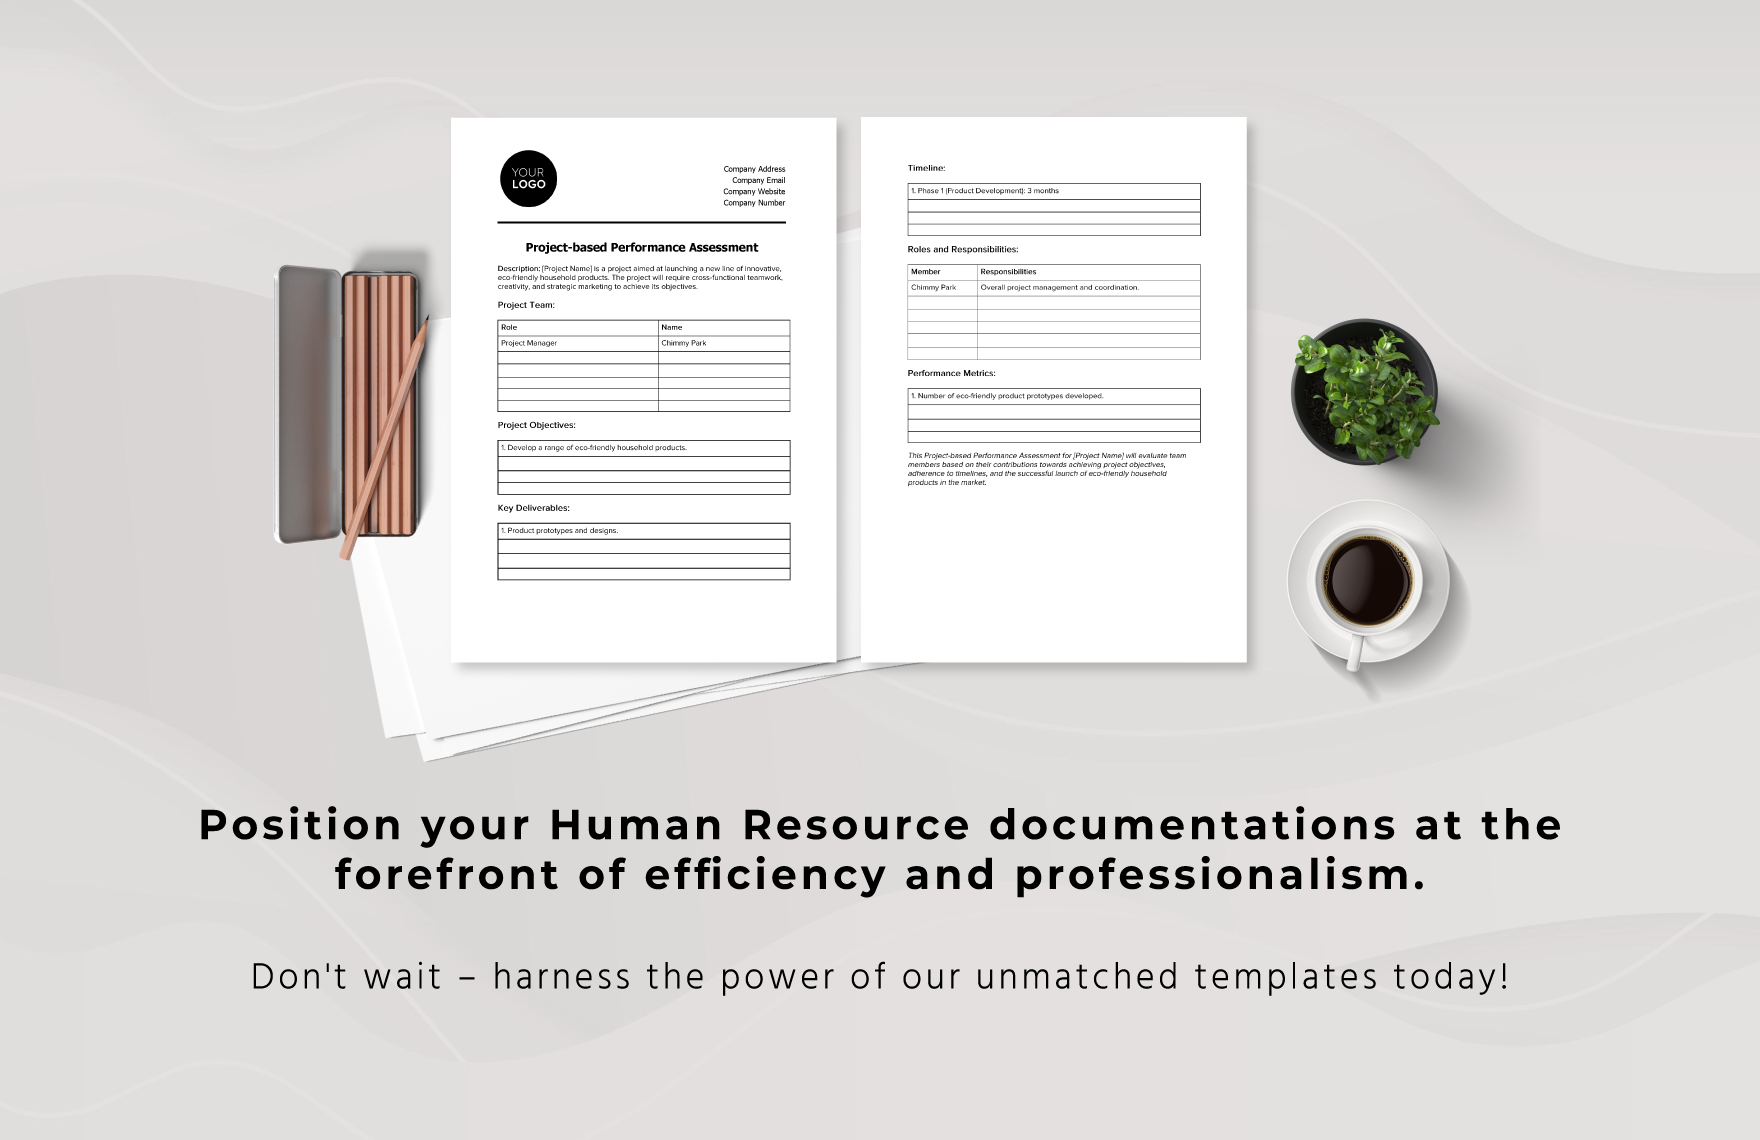 Project-based Performance Assessment HR Template